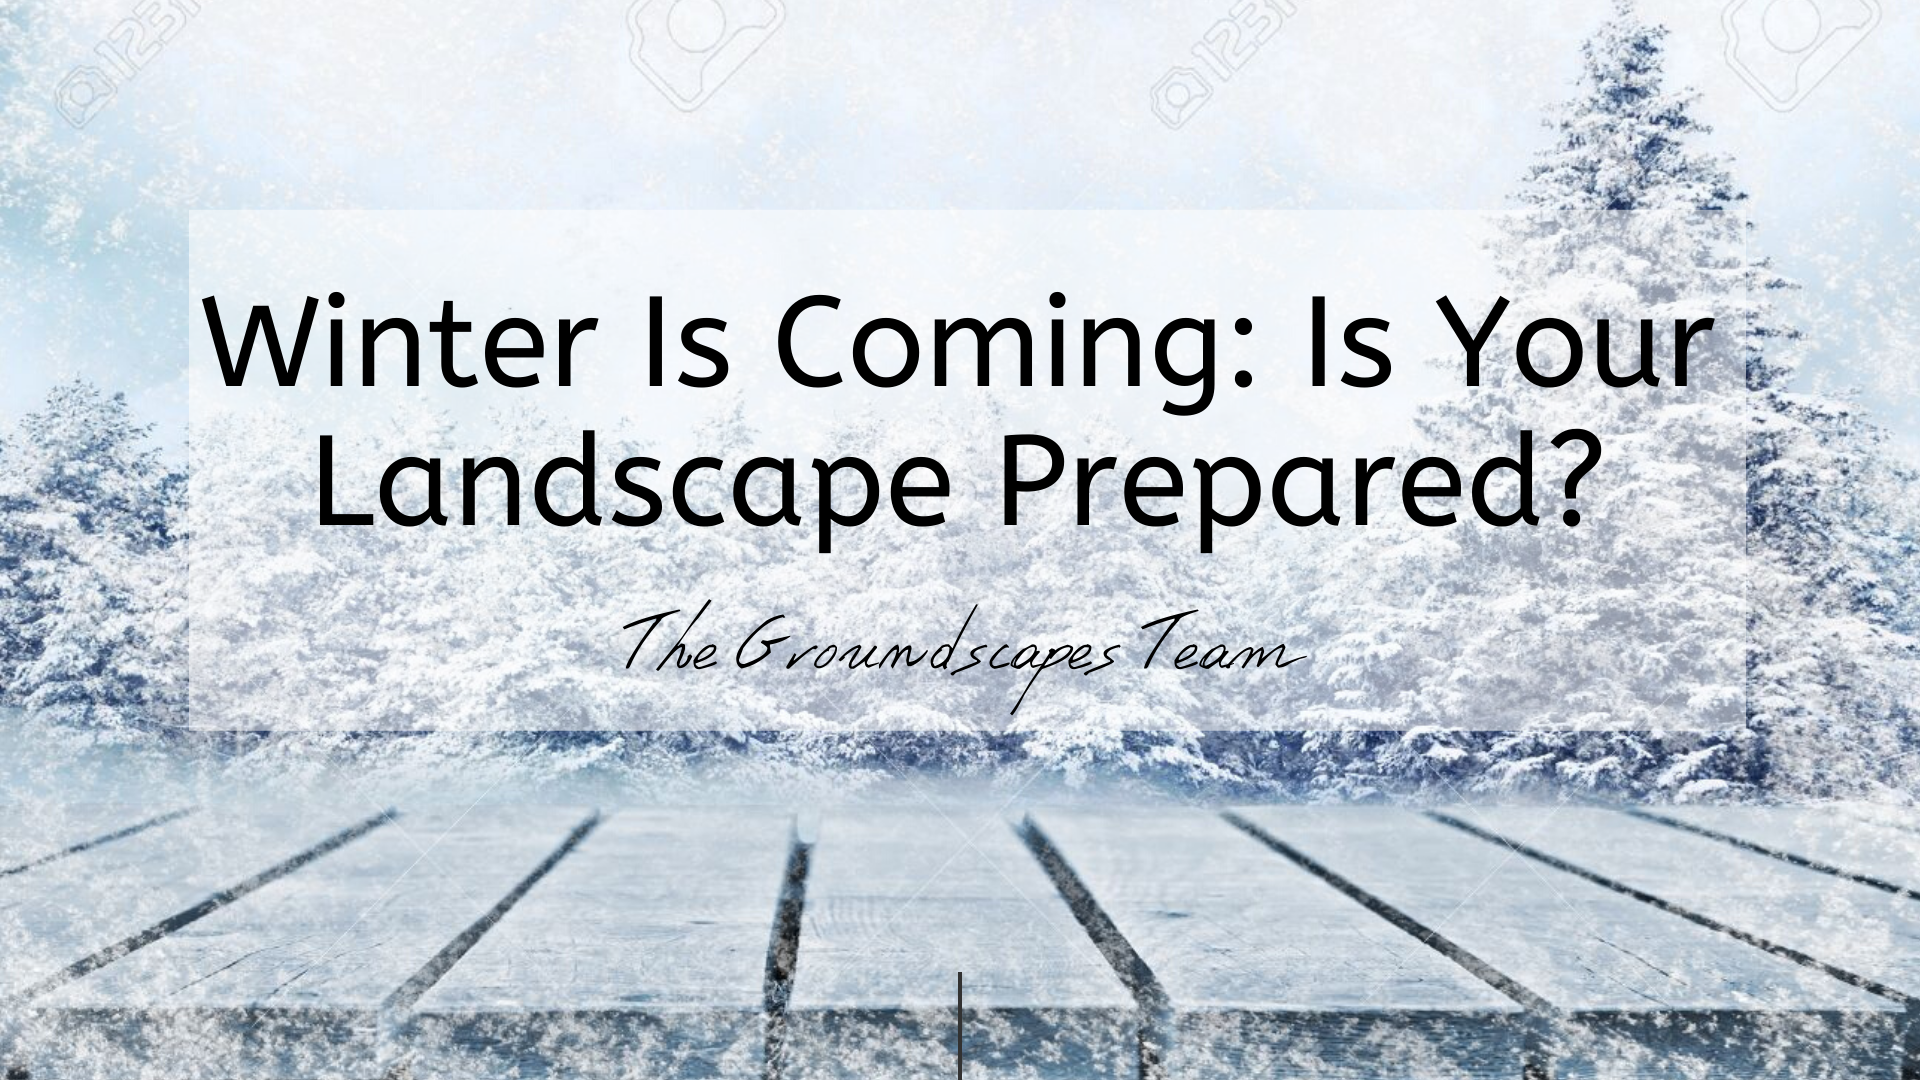 Winter is Coming: Is Your Landscape Prepared?